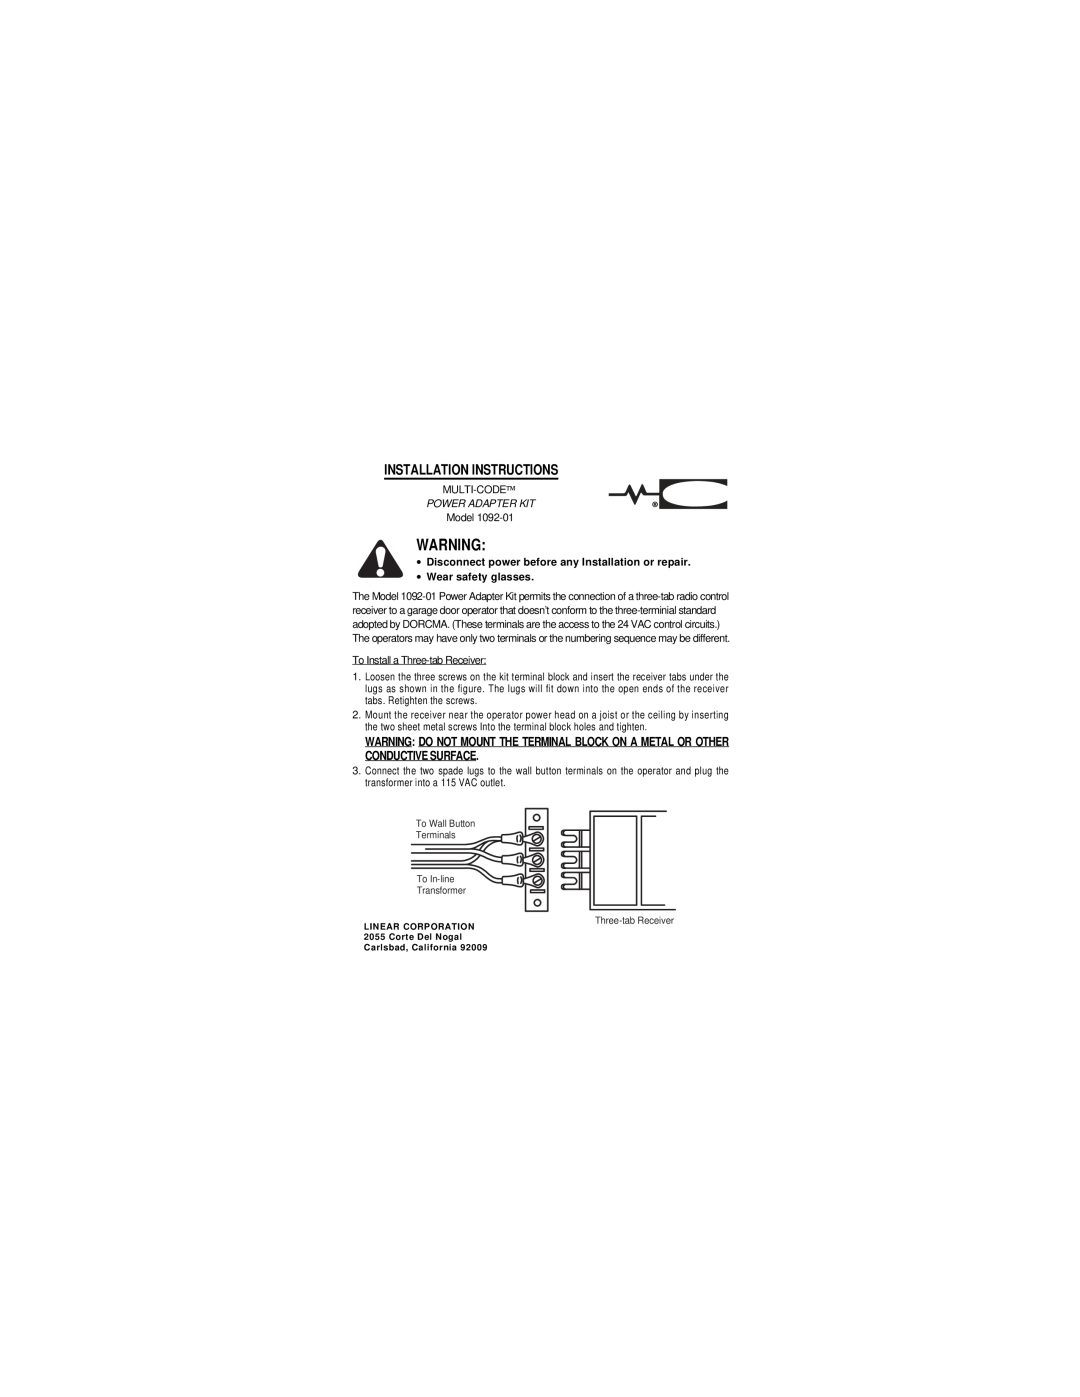 Linear 1092-01 installation instructions Installation Instructions, Power Adapter Kit, ∙ Wear safety glasses 